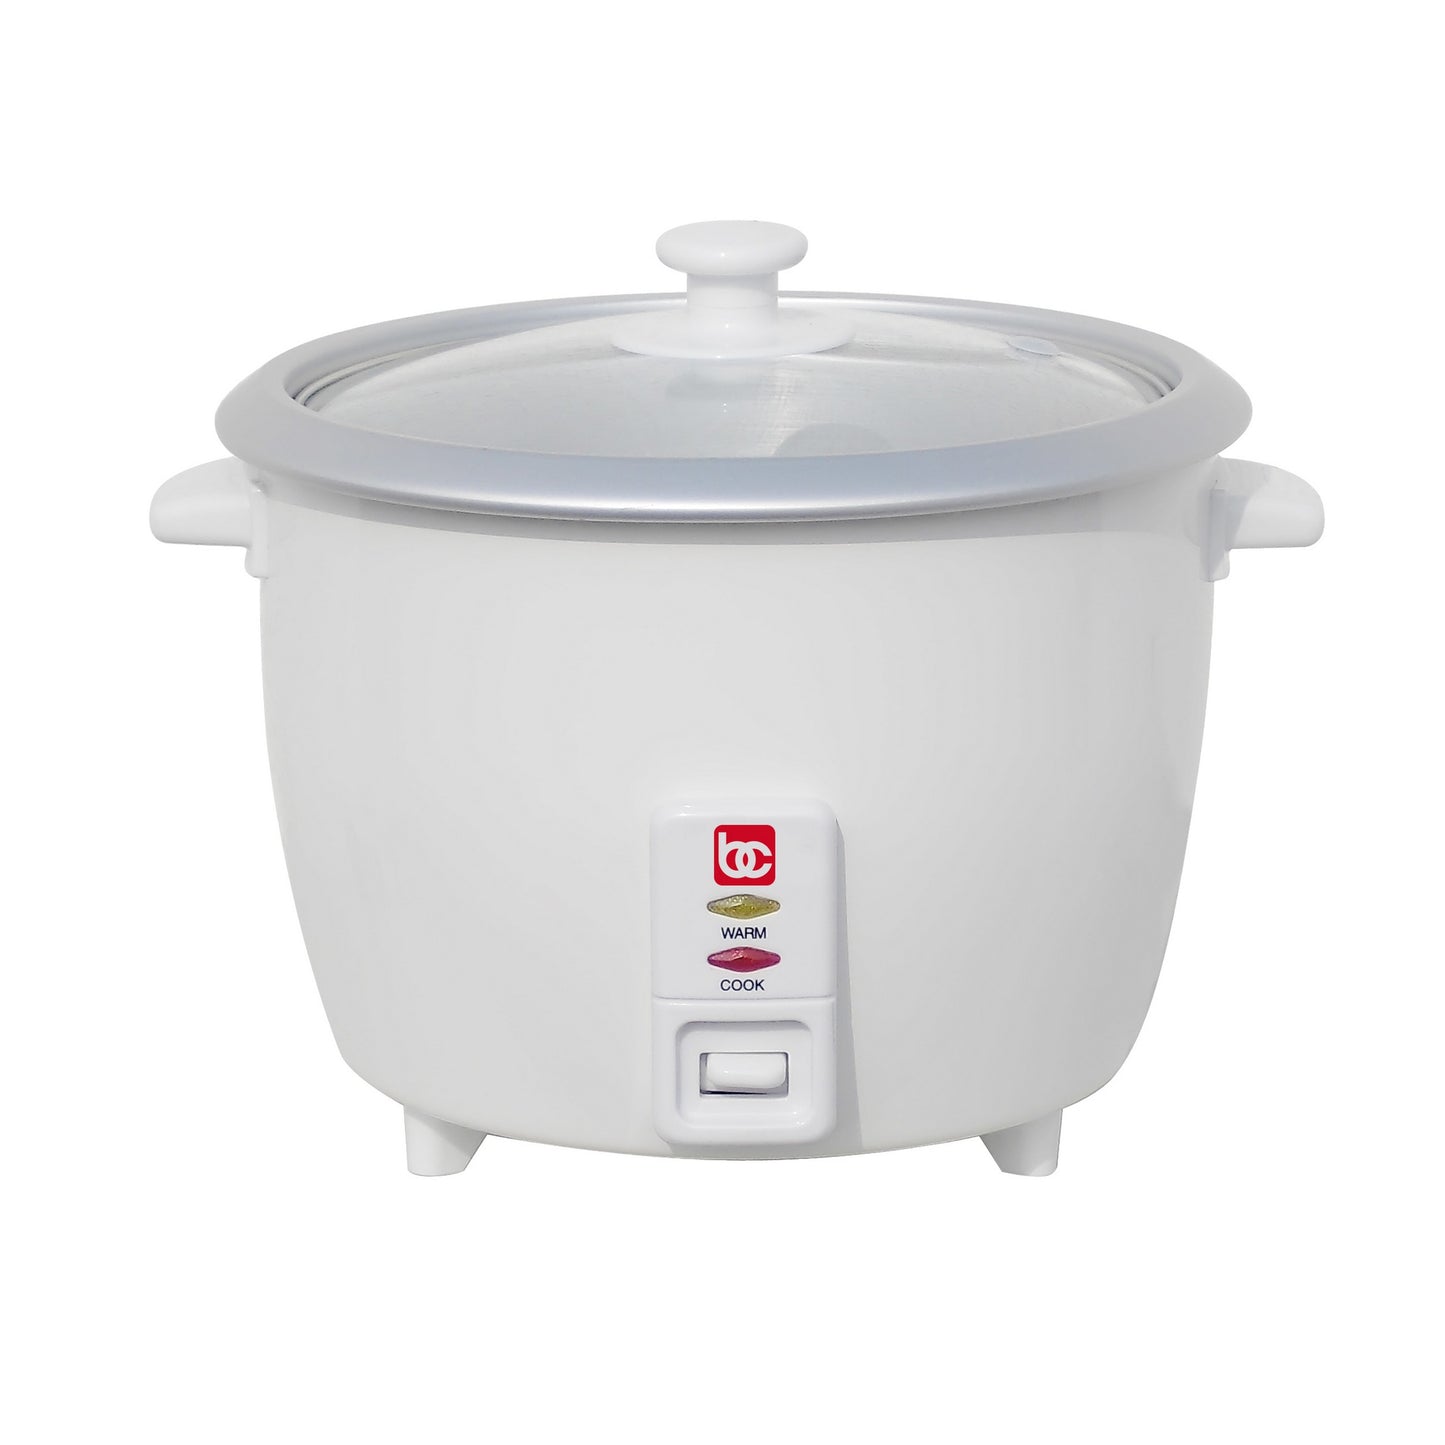 Better Chef 5-Cup Rice Cooker with Food Steamer - White, Timer